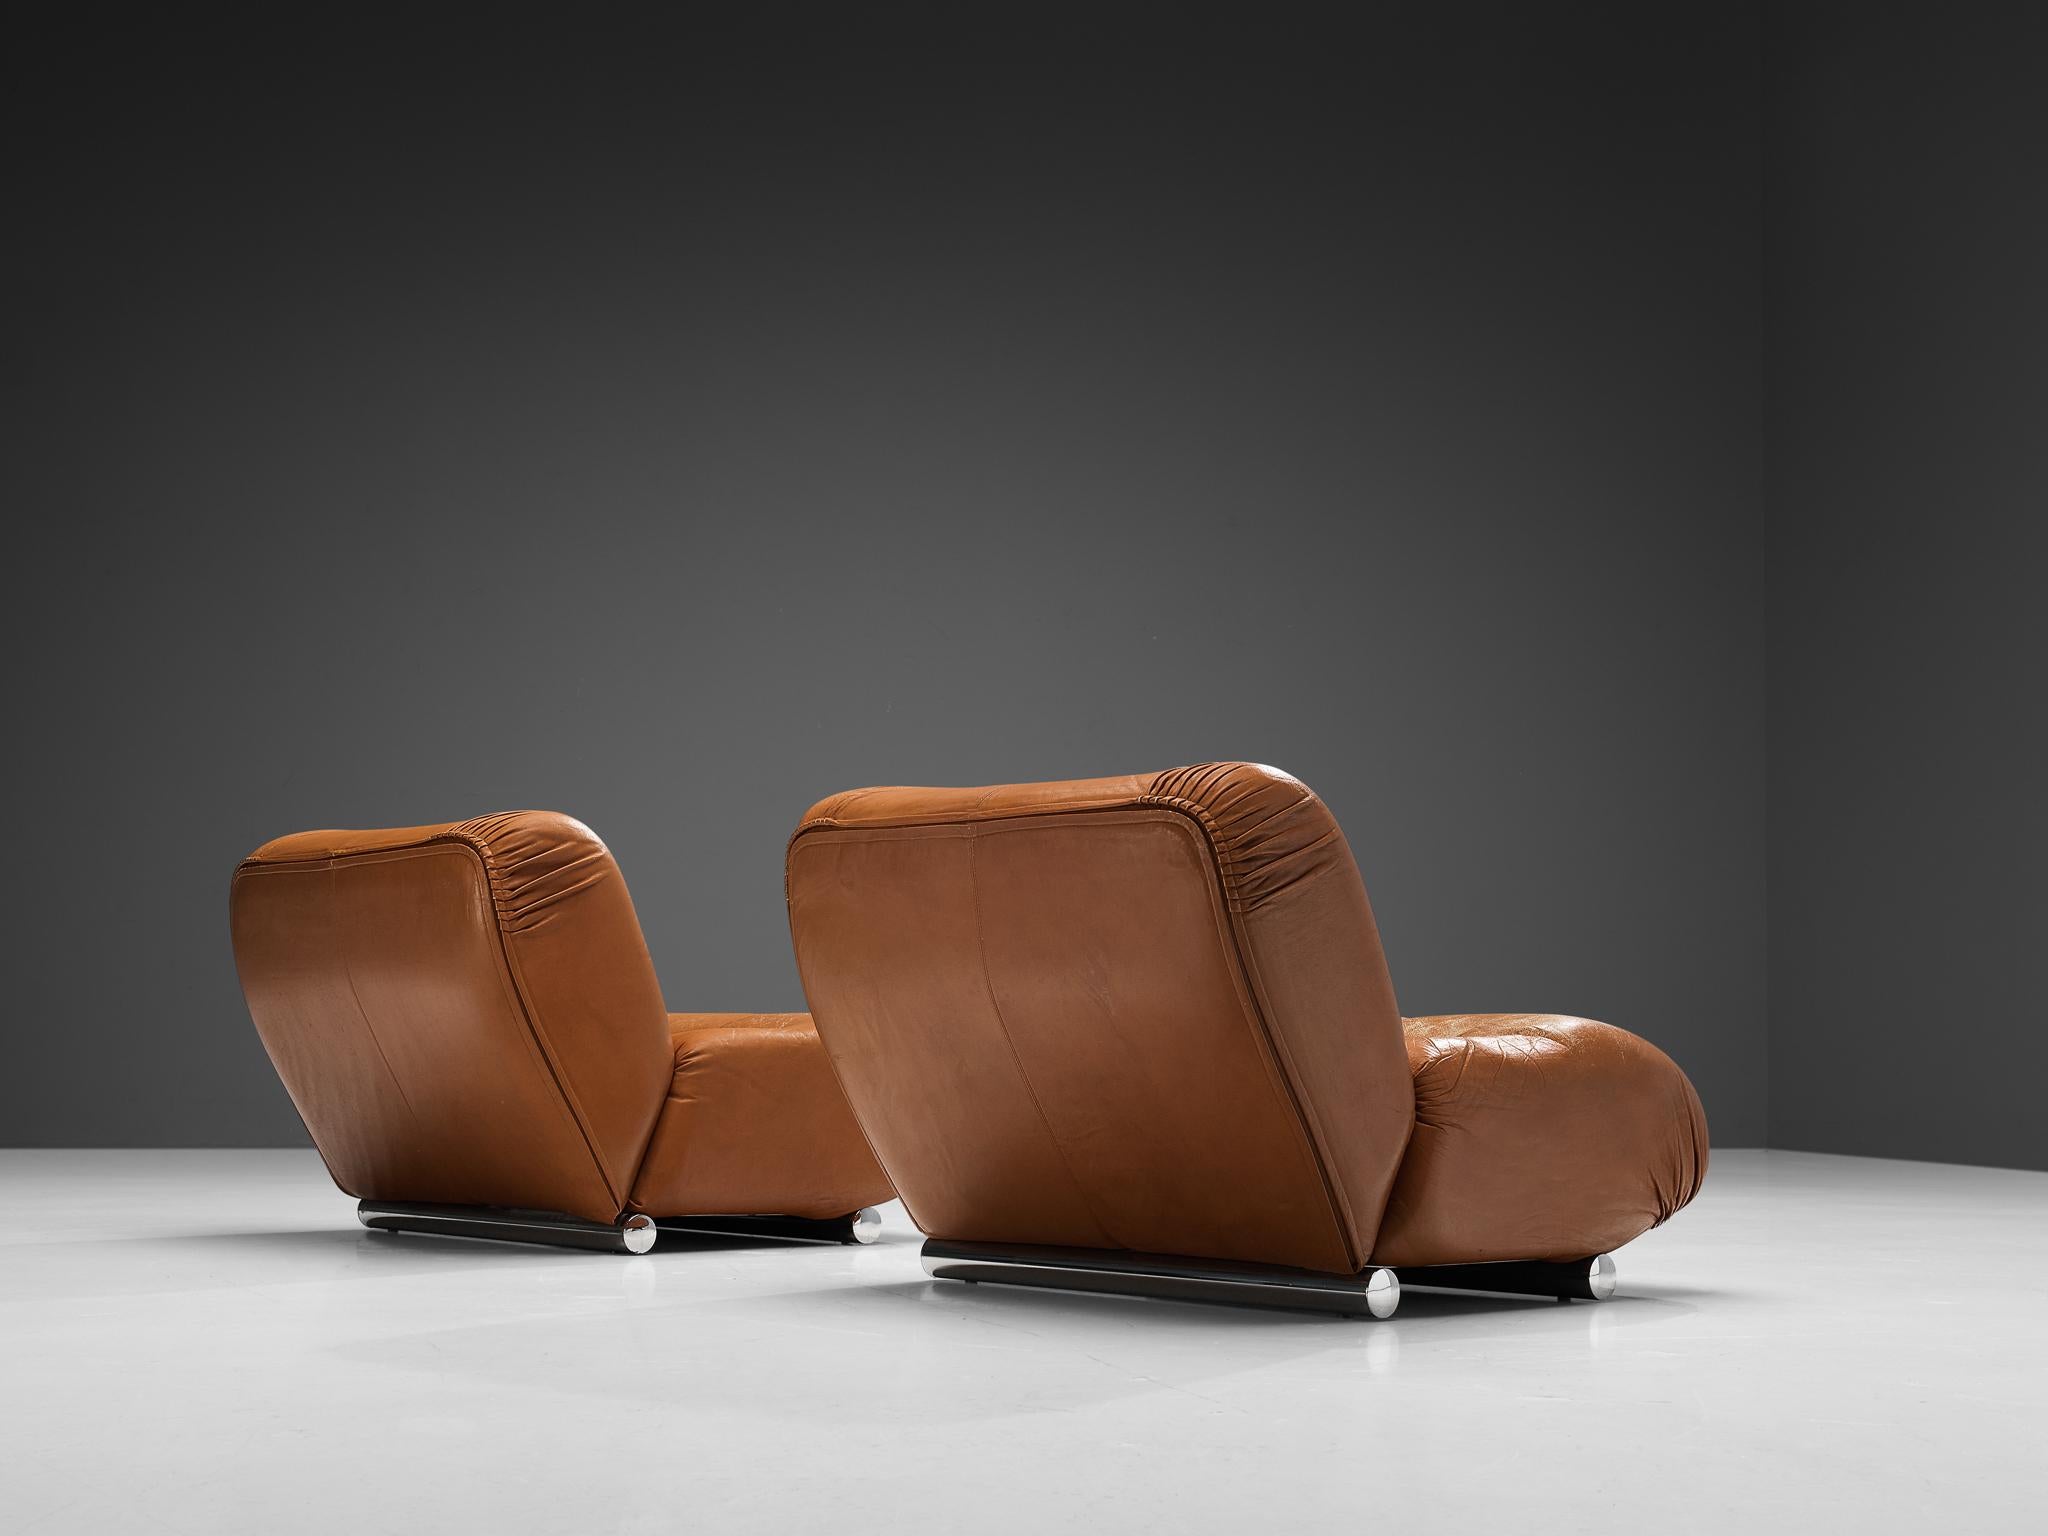 Steel Giuseppe Munari Lounge Chairs in Cognac Leather For Sale